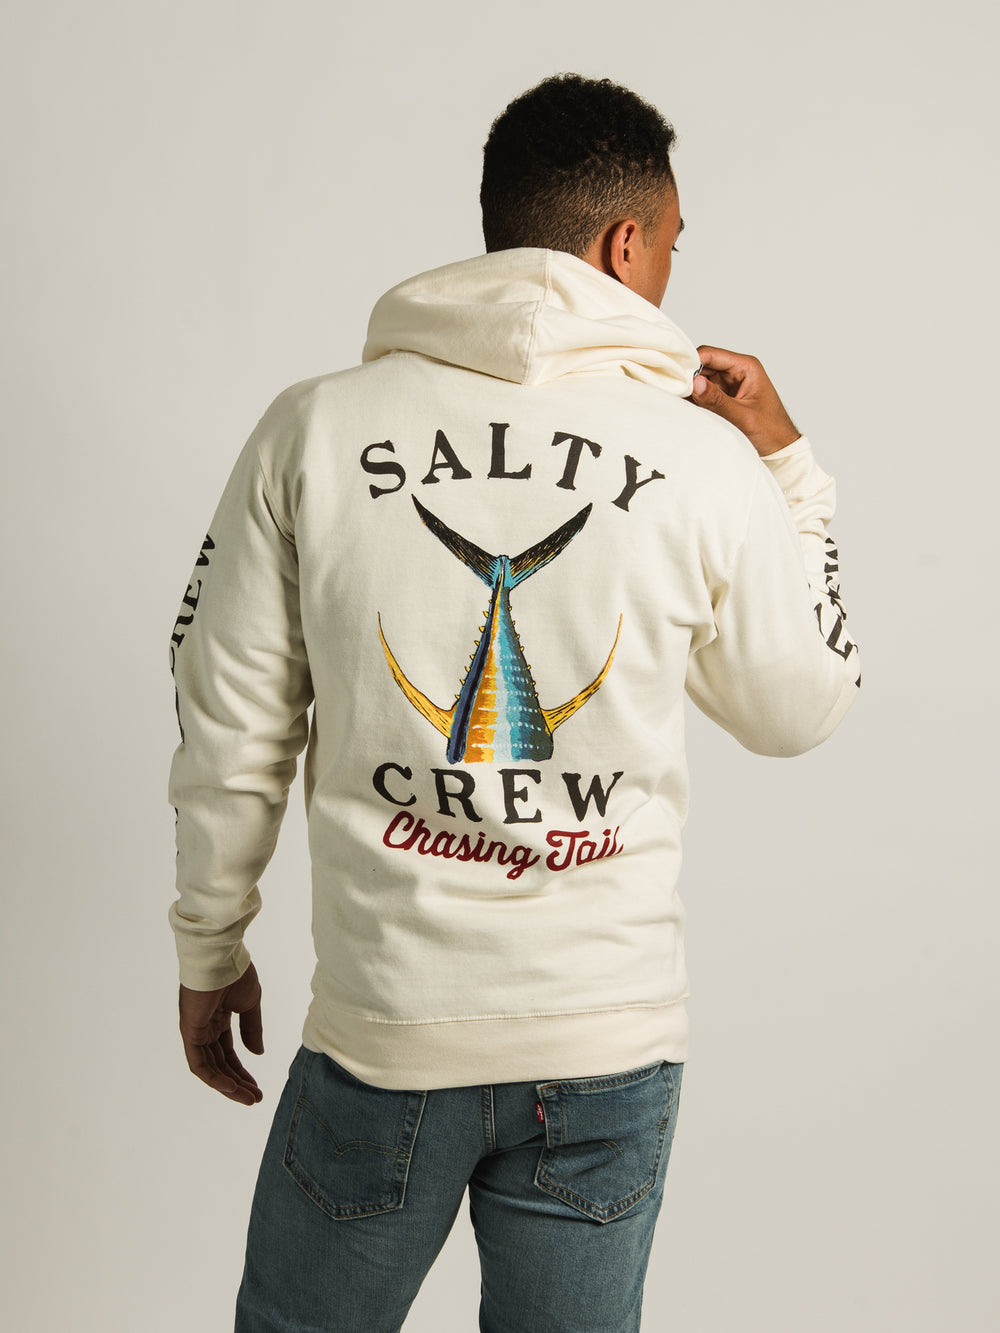 SALTY CREW TAILED PULLOVER HOODIE  - CLEARANCE